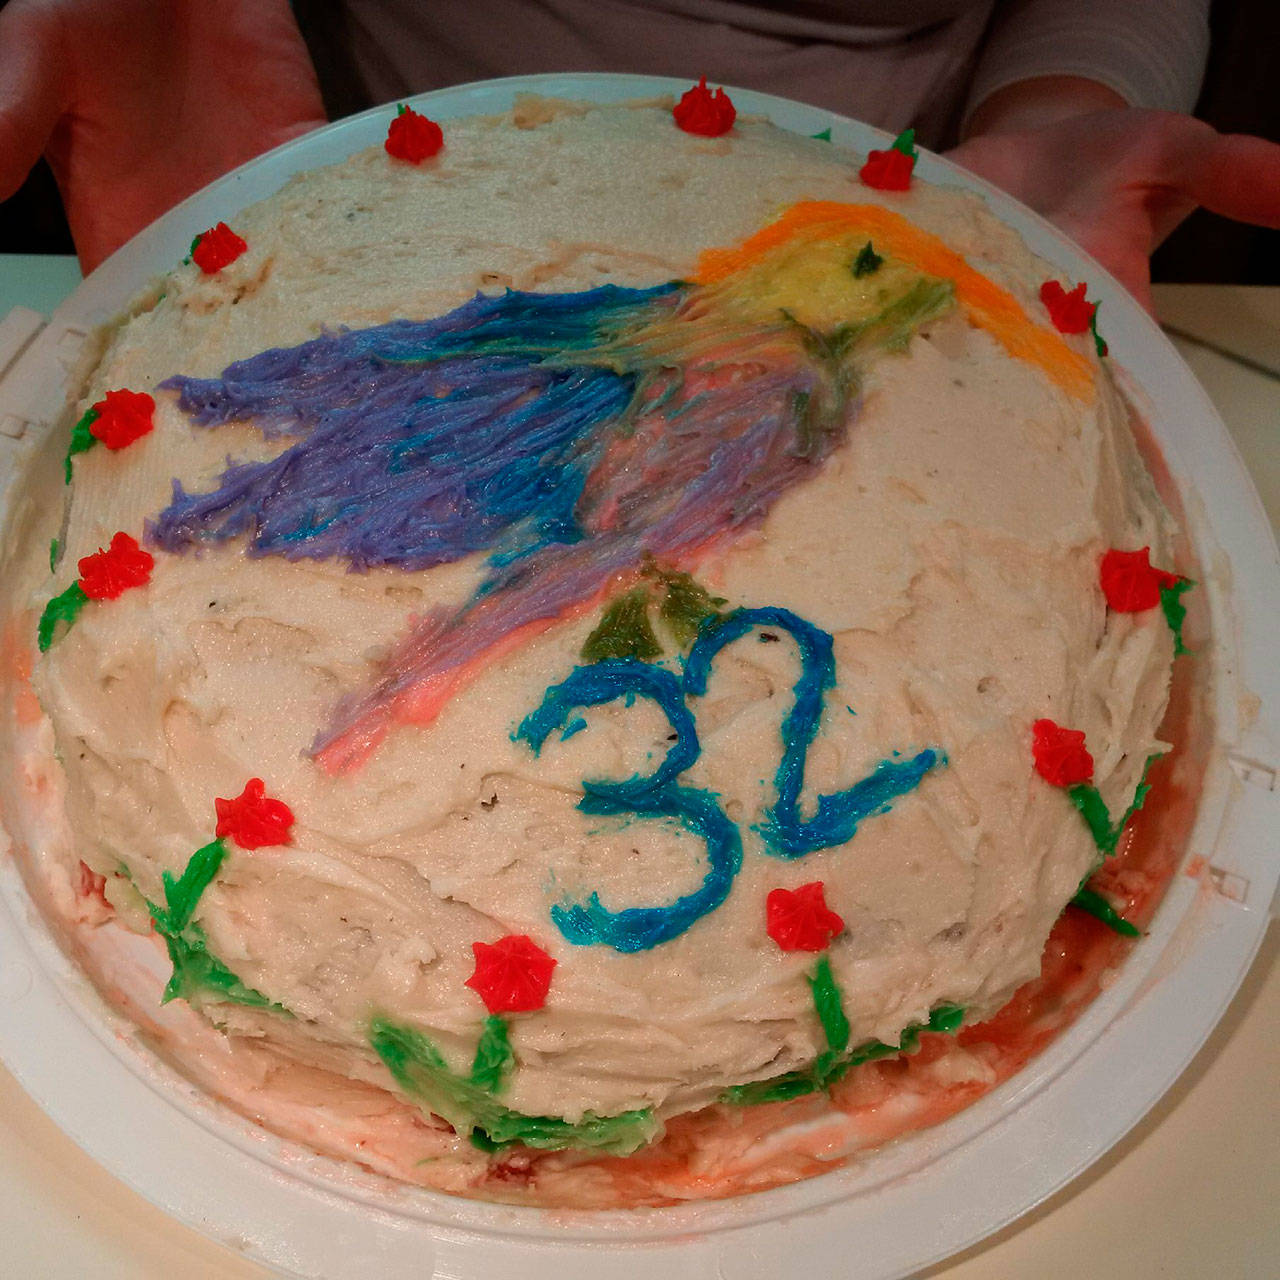 Emily Hanson’s 32nd birthday cake was decorated with a hummingbird. (Emily Hanson/Peninsula Daily News)